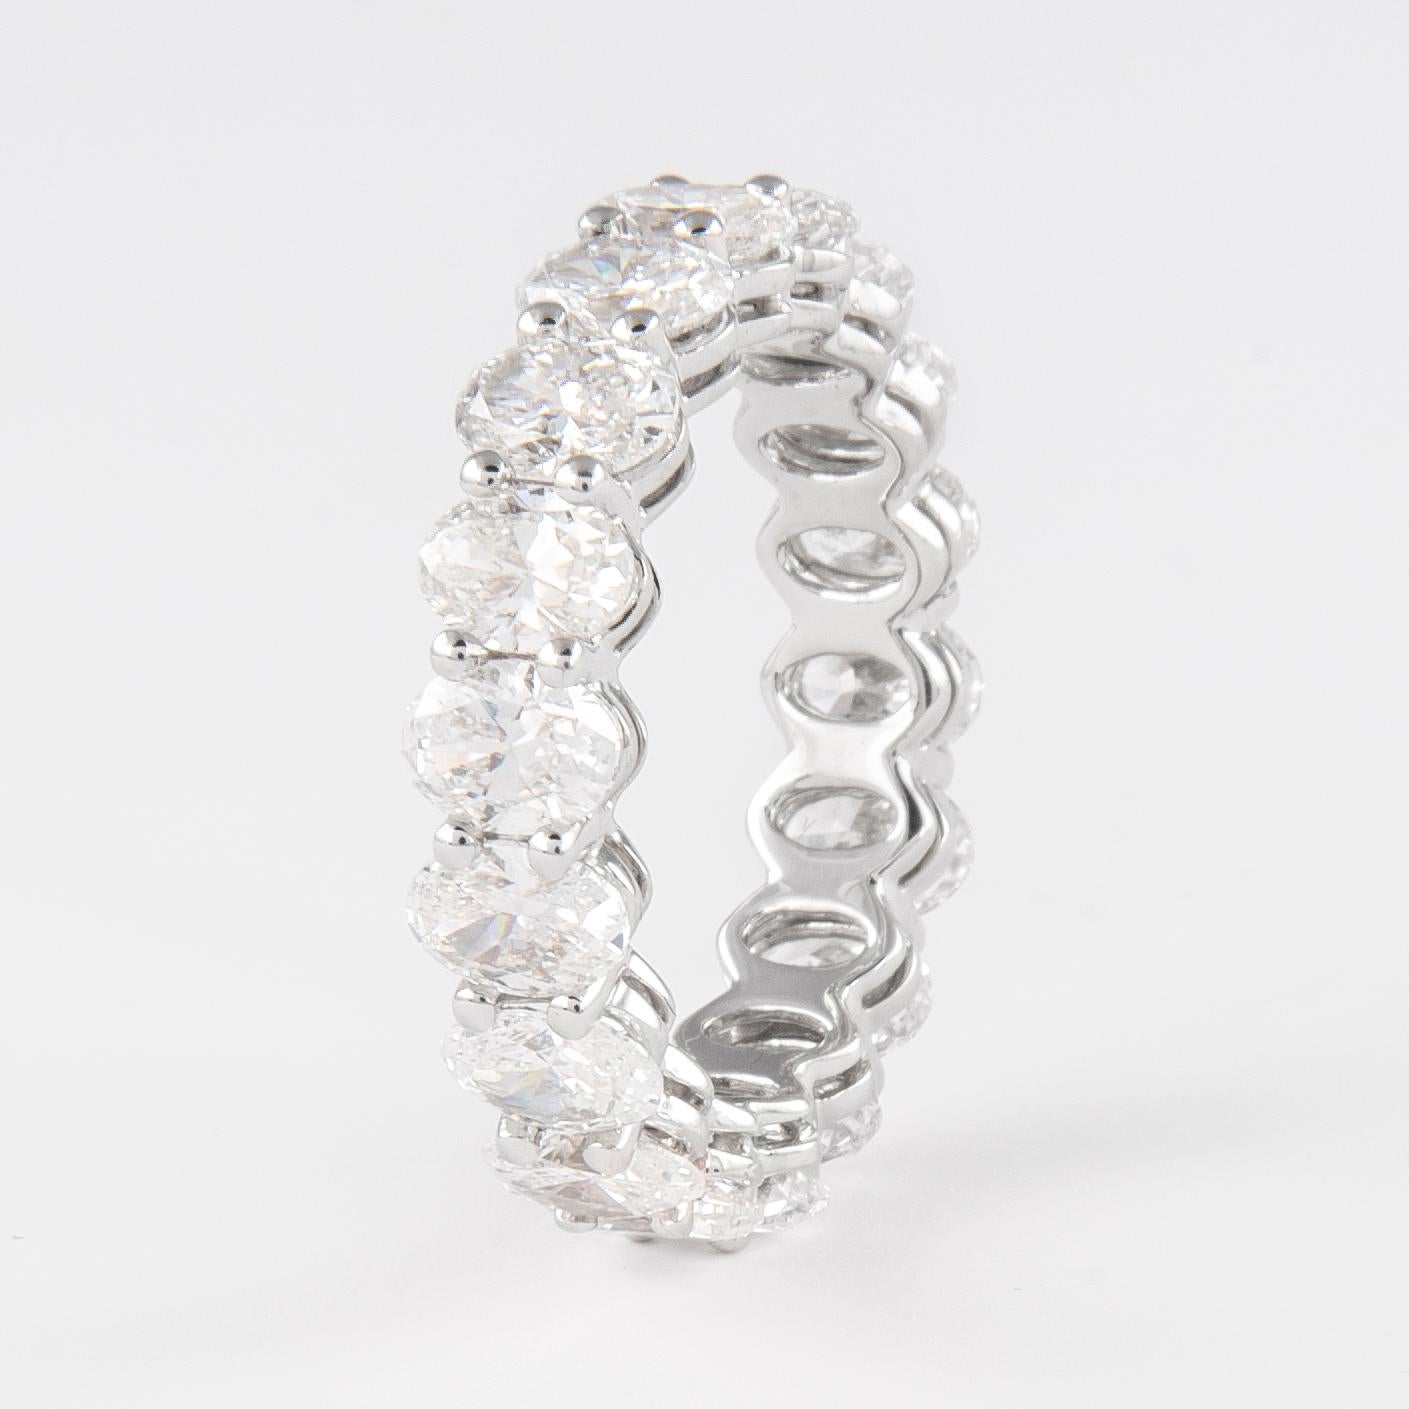 Stunning oval cut diamond eternity band, by Alexander Beverly Hills.
18 cut diamonds, 4.46 carats total. Approximately F color and VS clarity. Set in 18k white gold, 3.53 grams, size 6. 
Accommodated with an up-to-date appraisal by a GIA G.G. once